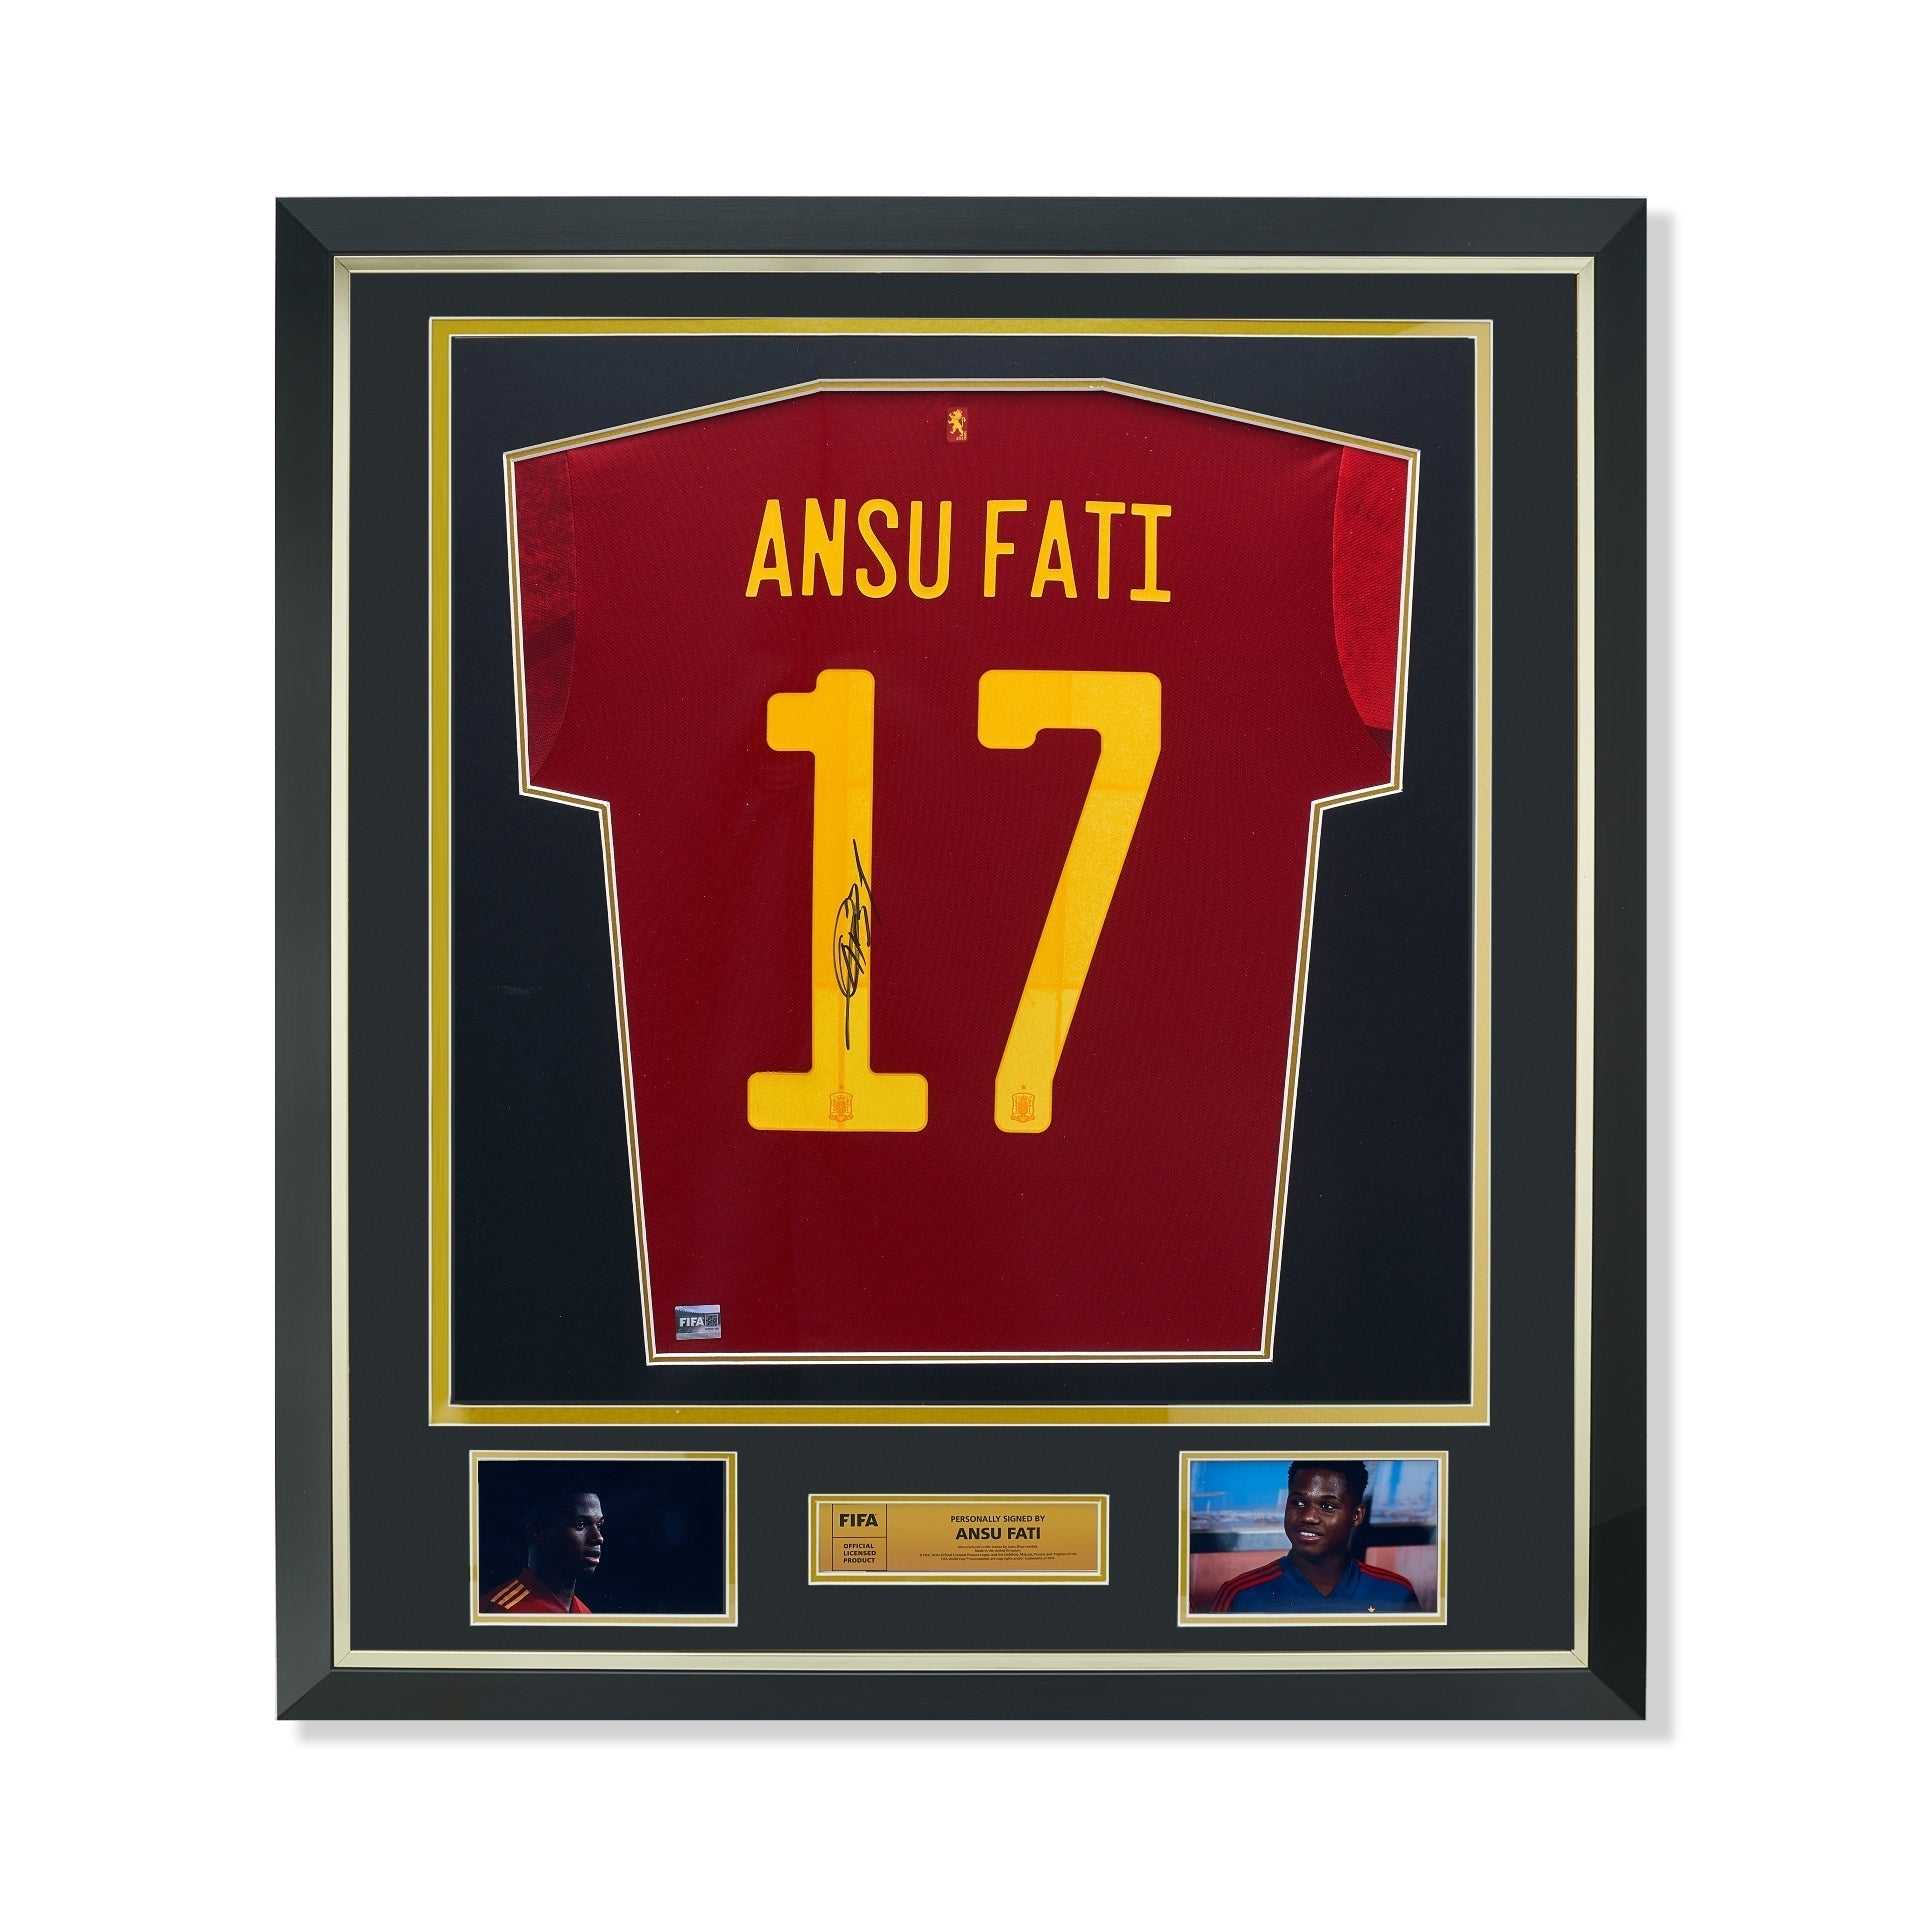 FIFA World Cup Ansu Fati Official Back Signed And Framed Spain 2020-21 Home Shirt